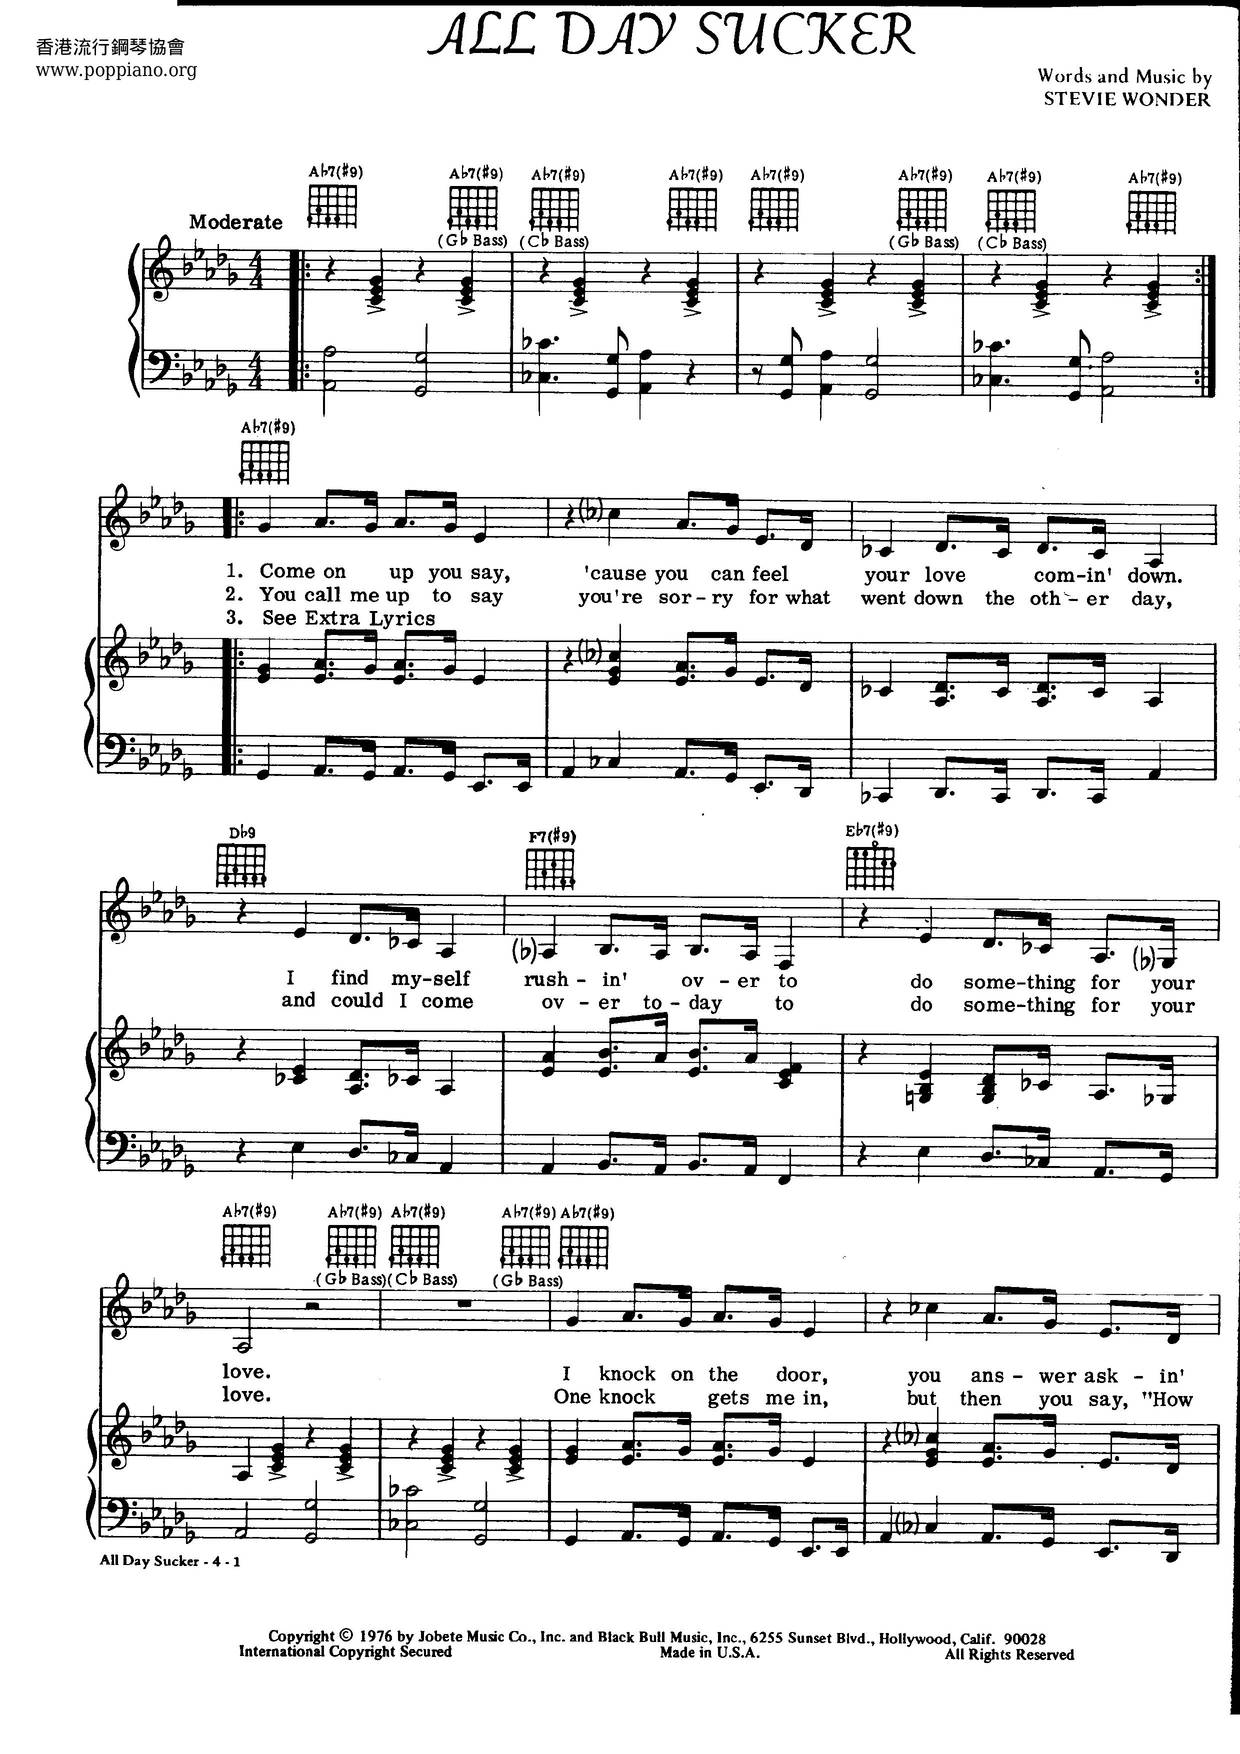 Free It Just Works by The Chalkeaters sheet music